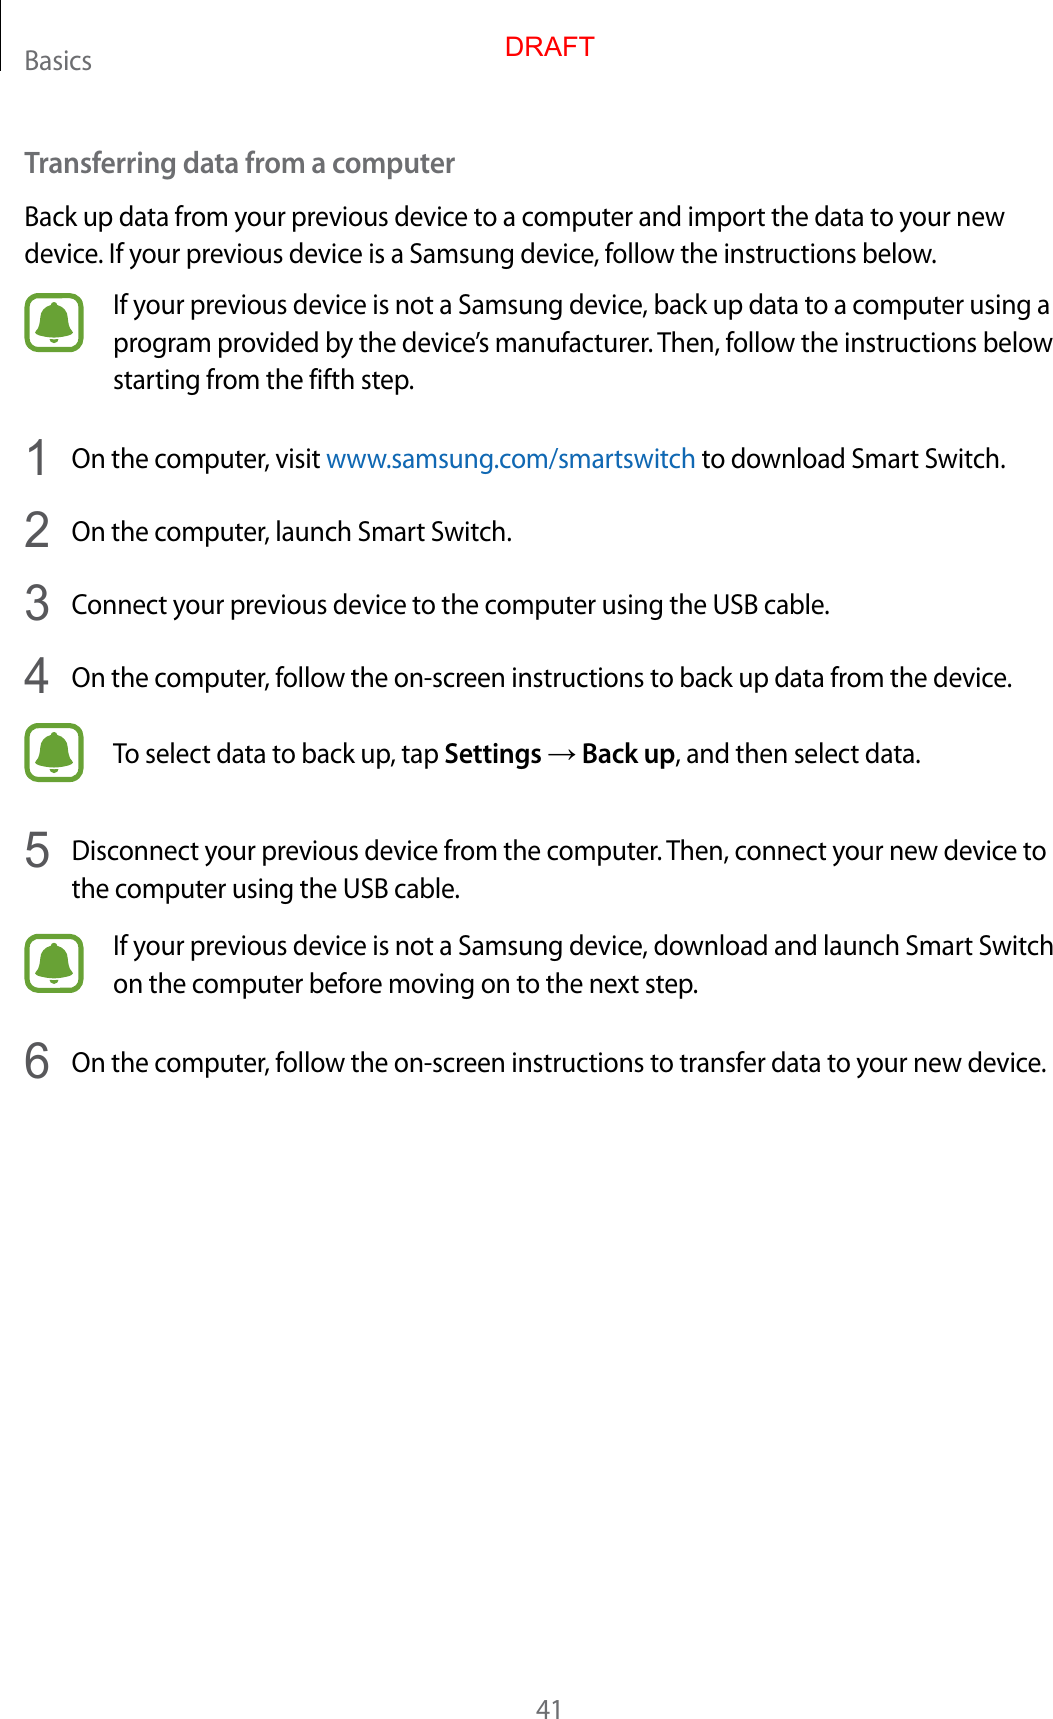 Basics41Transferring data from a computerBack up data from your previous device to a computer and import the data to your new device. If your previous device is a Samsung device, follow the instructions below.If your previous device is not a Samsung device, back up data to a computer using a program provided by the device’s manufacturer. Then, follow the instructions below starting from the fifth step.1  On the computer, visit www.samsung.com/smartswitch to download Smart Switch.2  On the computer, launch Smart Switch.3  Connect your previous device to the computer using the USB cable.4  On the computer, follow the on-screen instructions to back up data from the device.To select data to back up, tap Settings → Back up, and then select data.5  Disconnect your previous device from the computer. Then, connect your new device to the computer using the USB cable.If your previous device is not a Samsung device, download and launch Smart Switch on the computer before moving on to the next step.6  On the computer, follow the on-screen instructions to transfer data to your new device.DRAFT